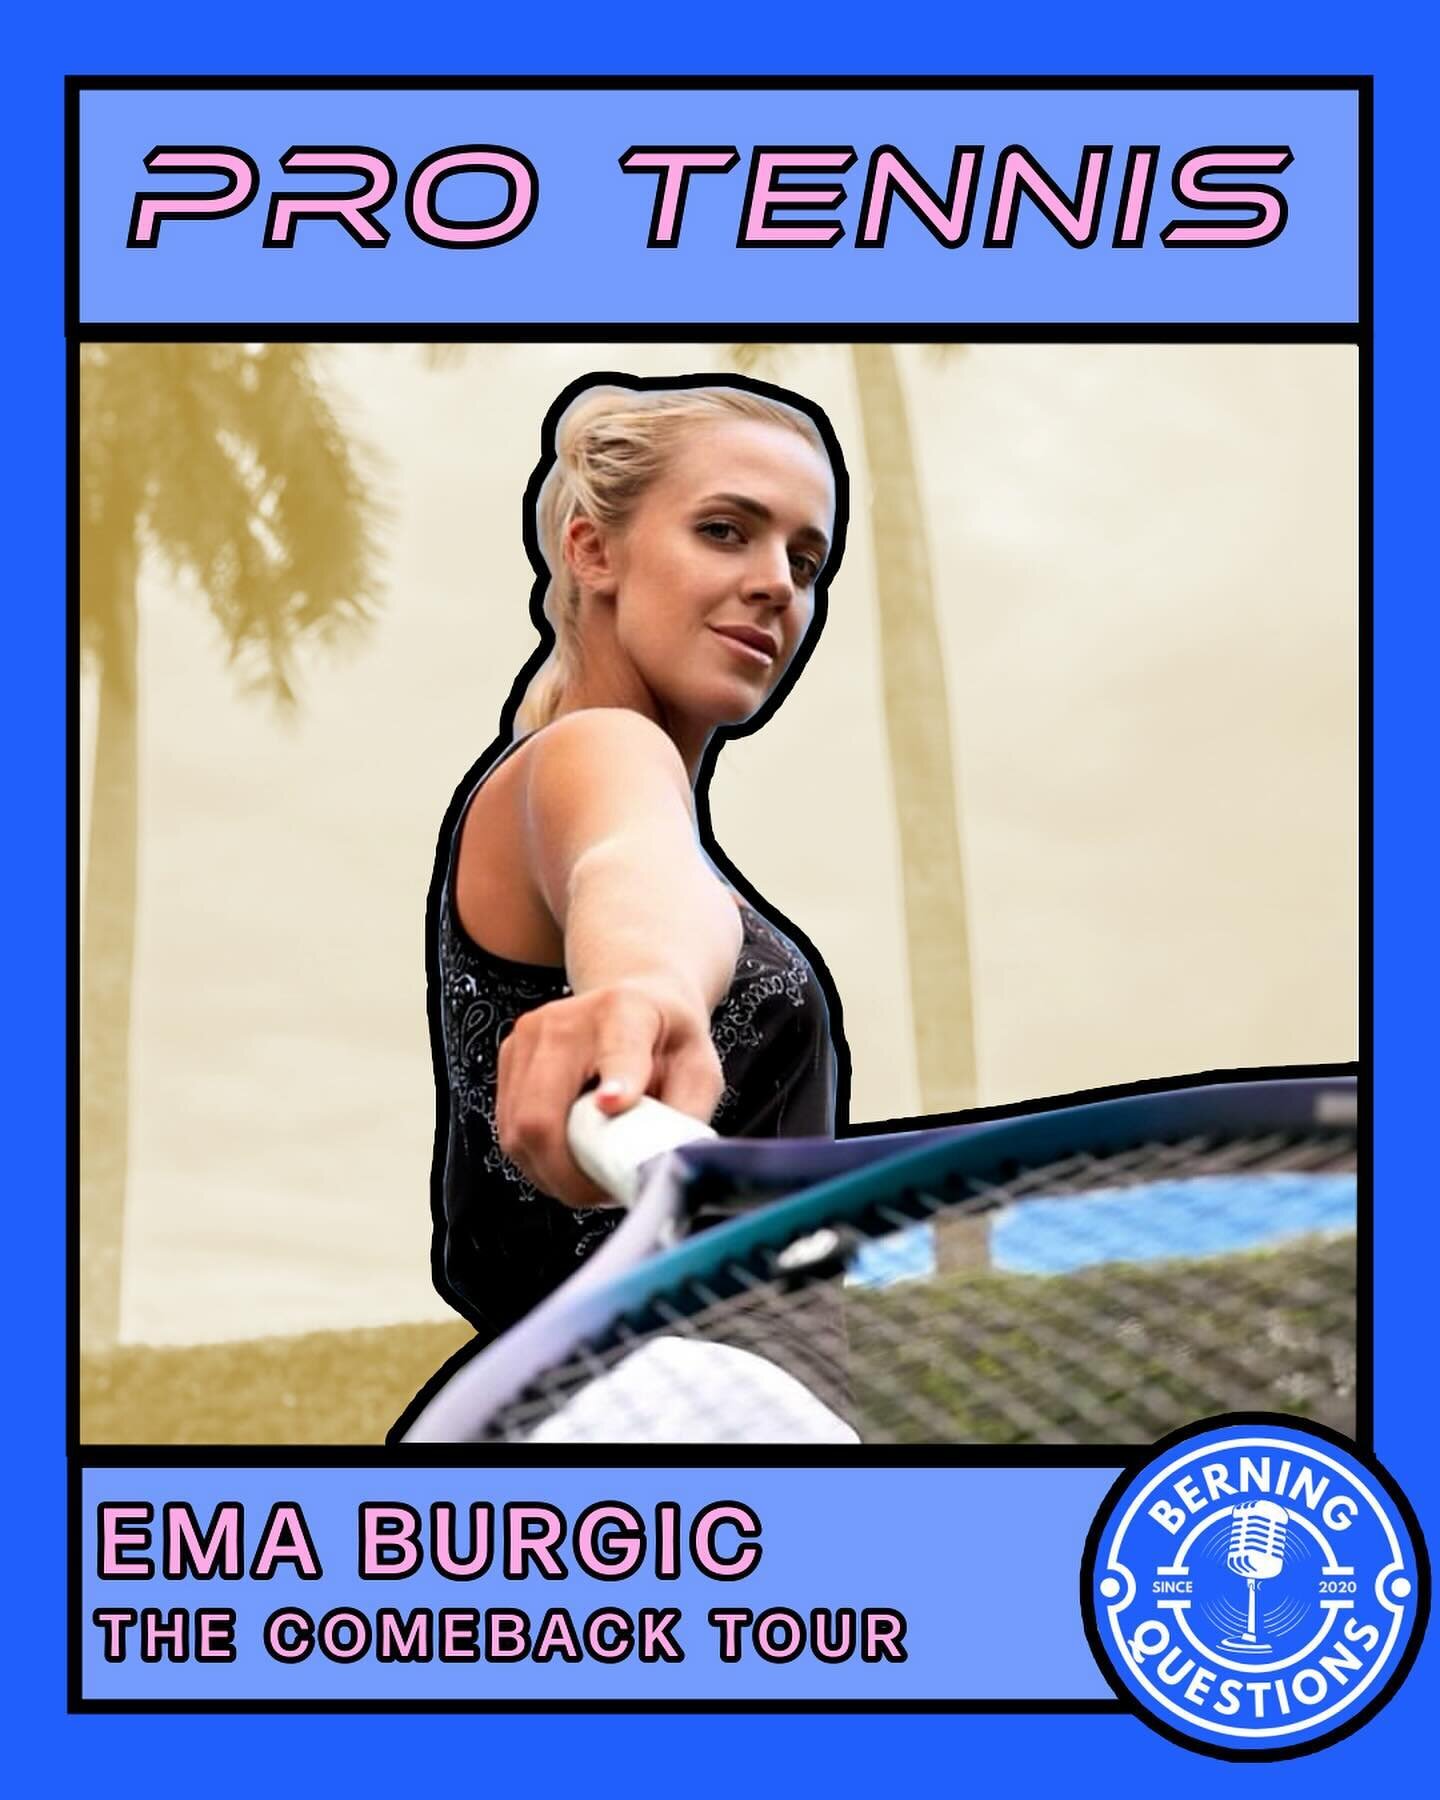 Meet Ema Burgic🤝🏻

@tenniswithema is a professional tennis player on her comeback tour!! With an impressive resume, Ema has been a supporter of Berning Questions since the start. Let&rsquo;s join in showing Ema our support as a feature on our tradi